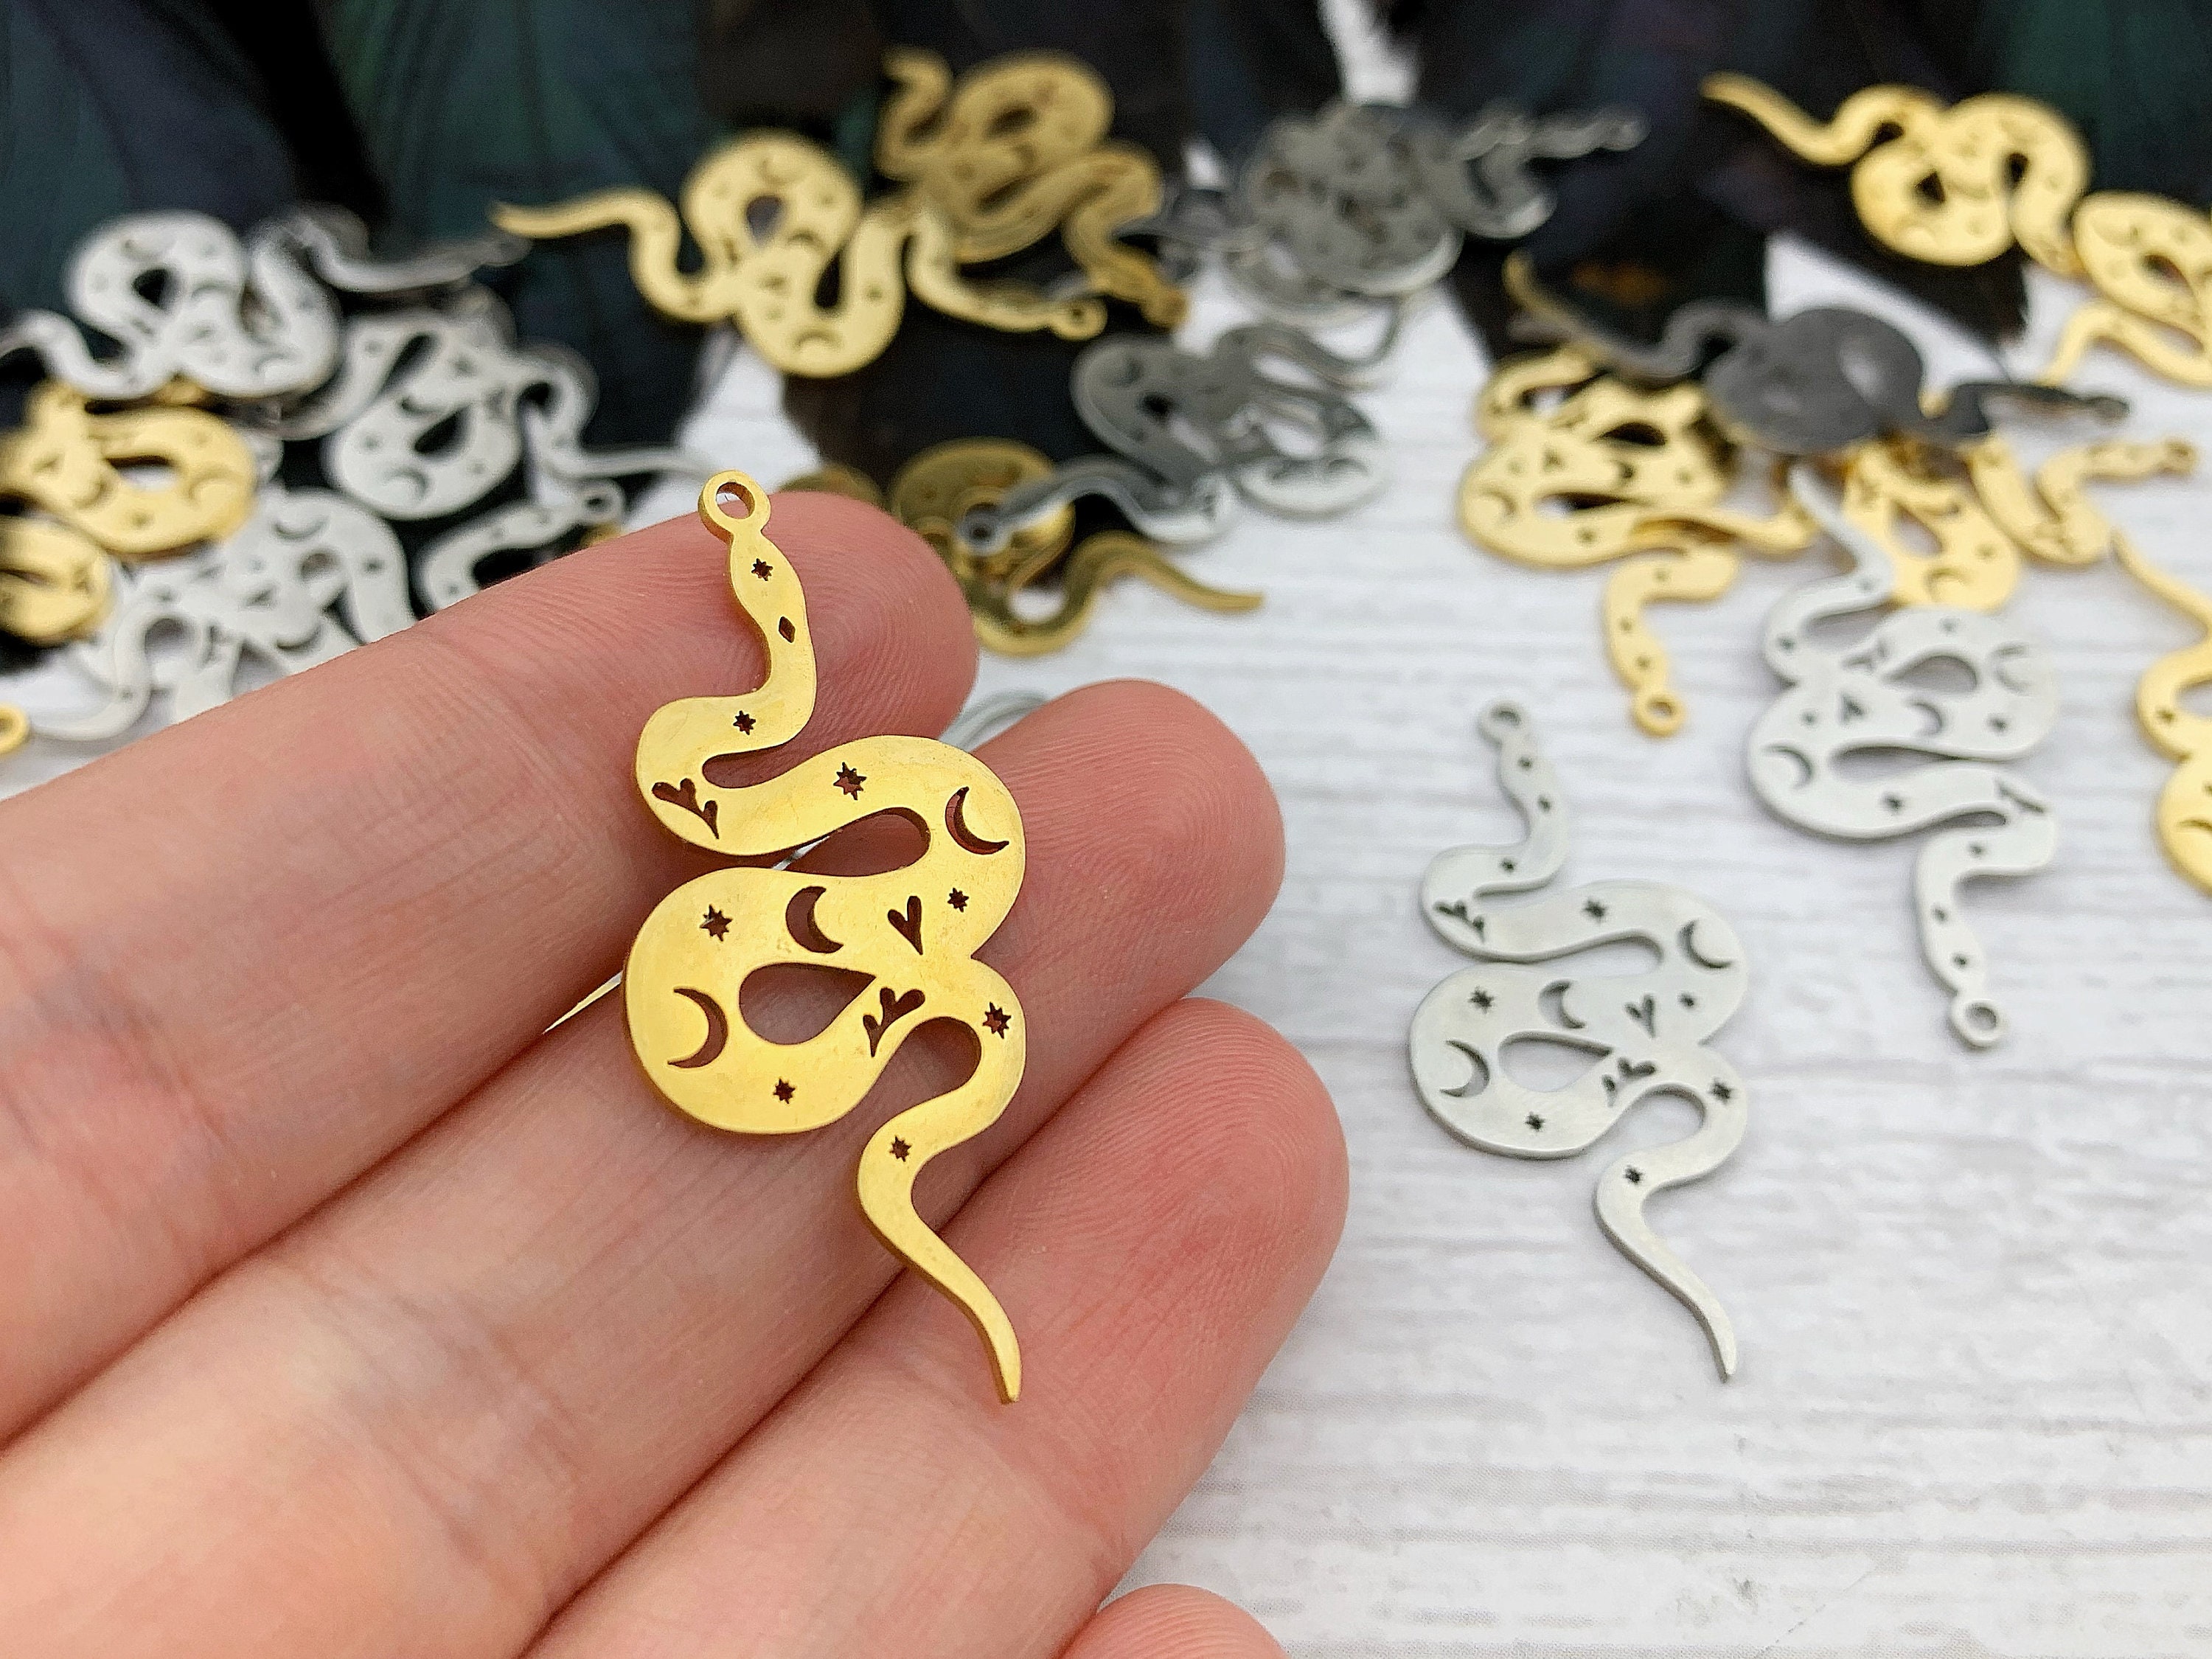 5pcs Yoga Goddess Charms Pendant Charm Pagan Jewelry Wicca Witchy Charms  for Women Yoga Nymph Accessories - (Metal Color: 1)